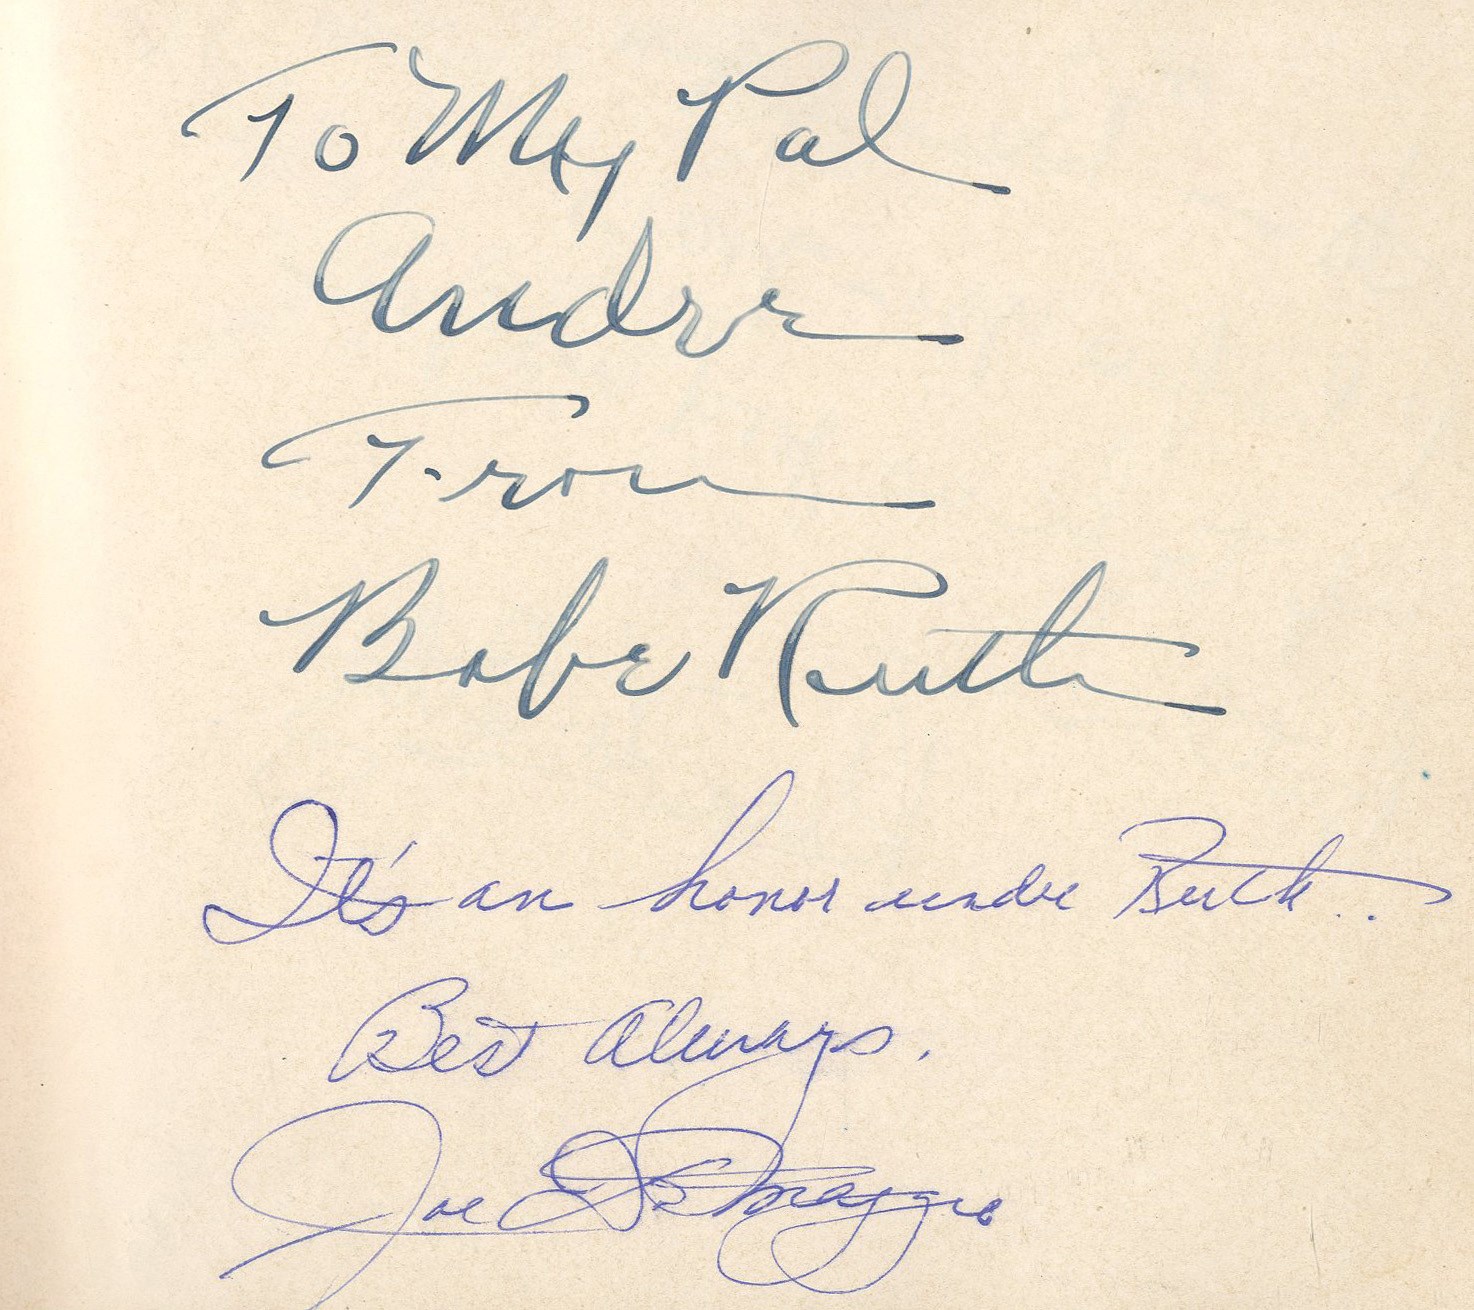 Baseball Autographs - The Stork Club Autograph Book with Babe Ruth & Joe DiMaggio Together - A Who's Who of 1940s-50s Manhattan Elite (PSA)